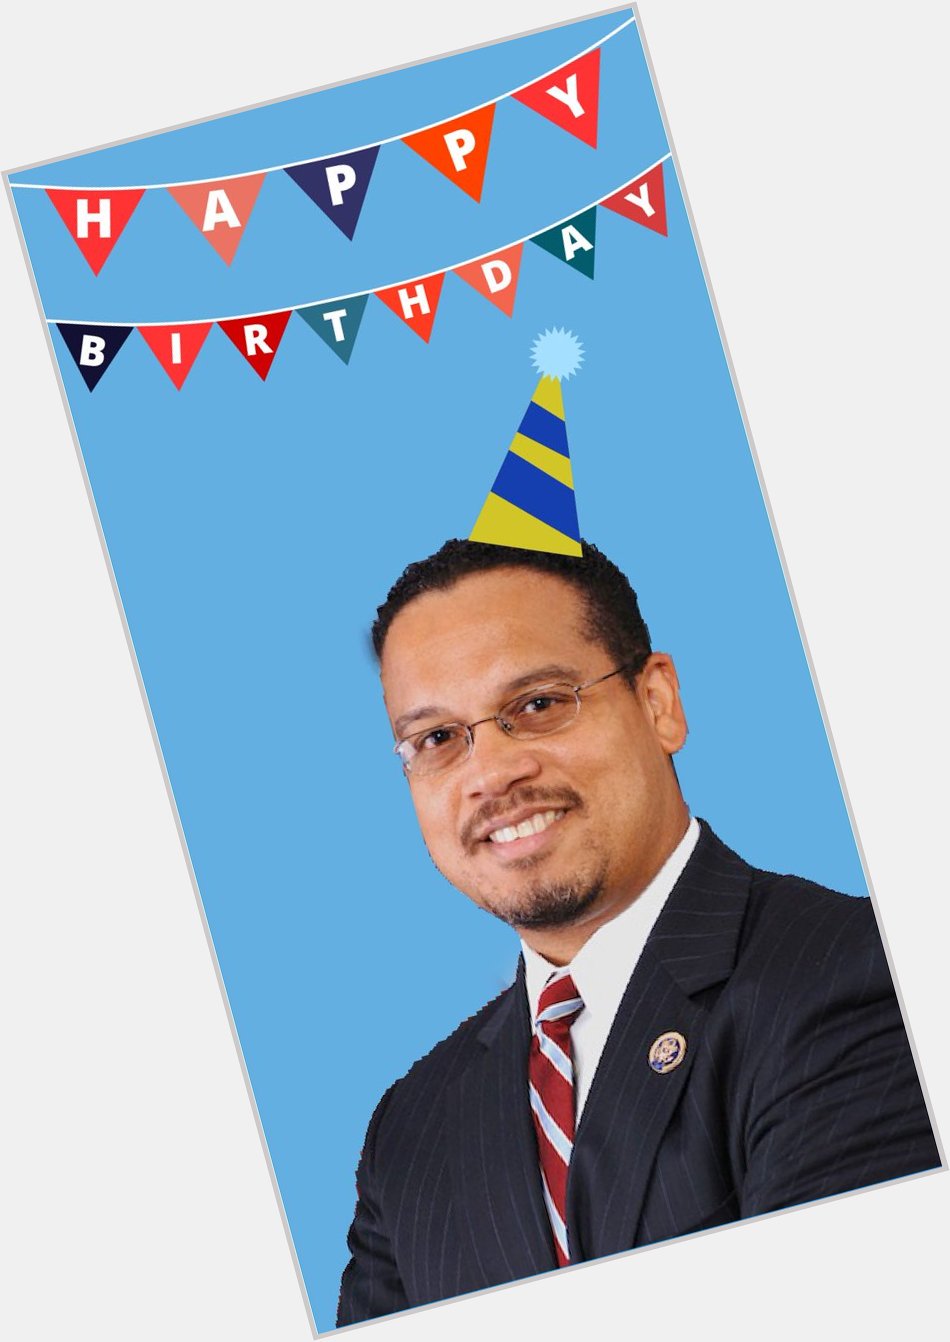 We wish a happy birthday to the deputy chair of the and congressman from Minnesota, Keith Ellison!   